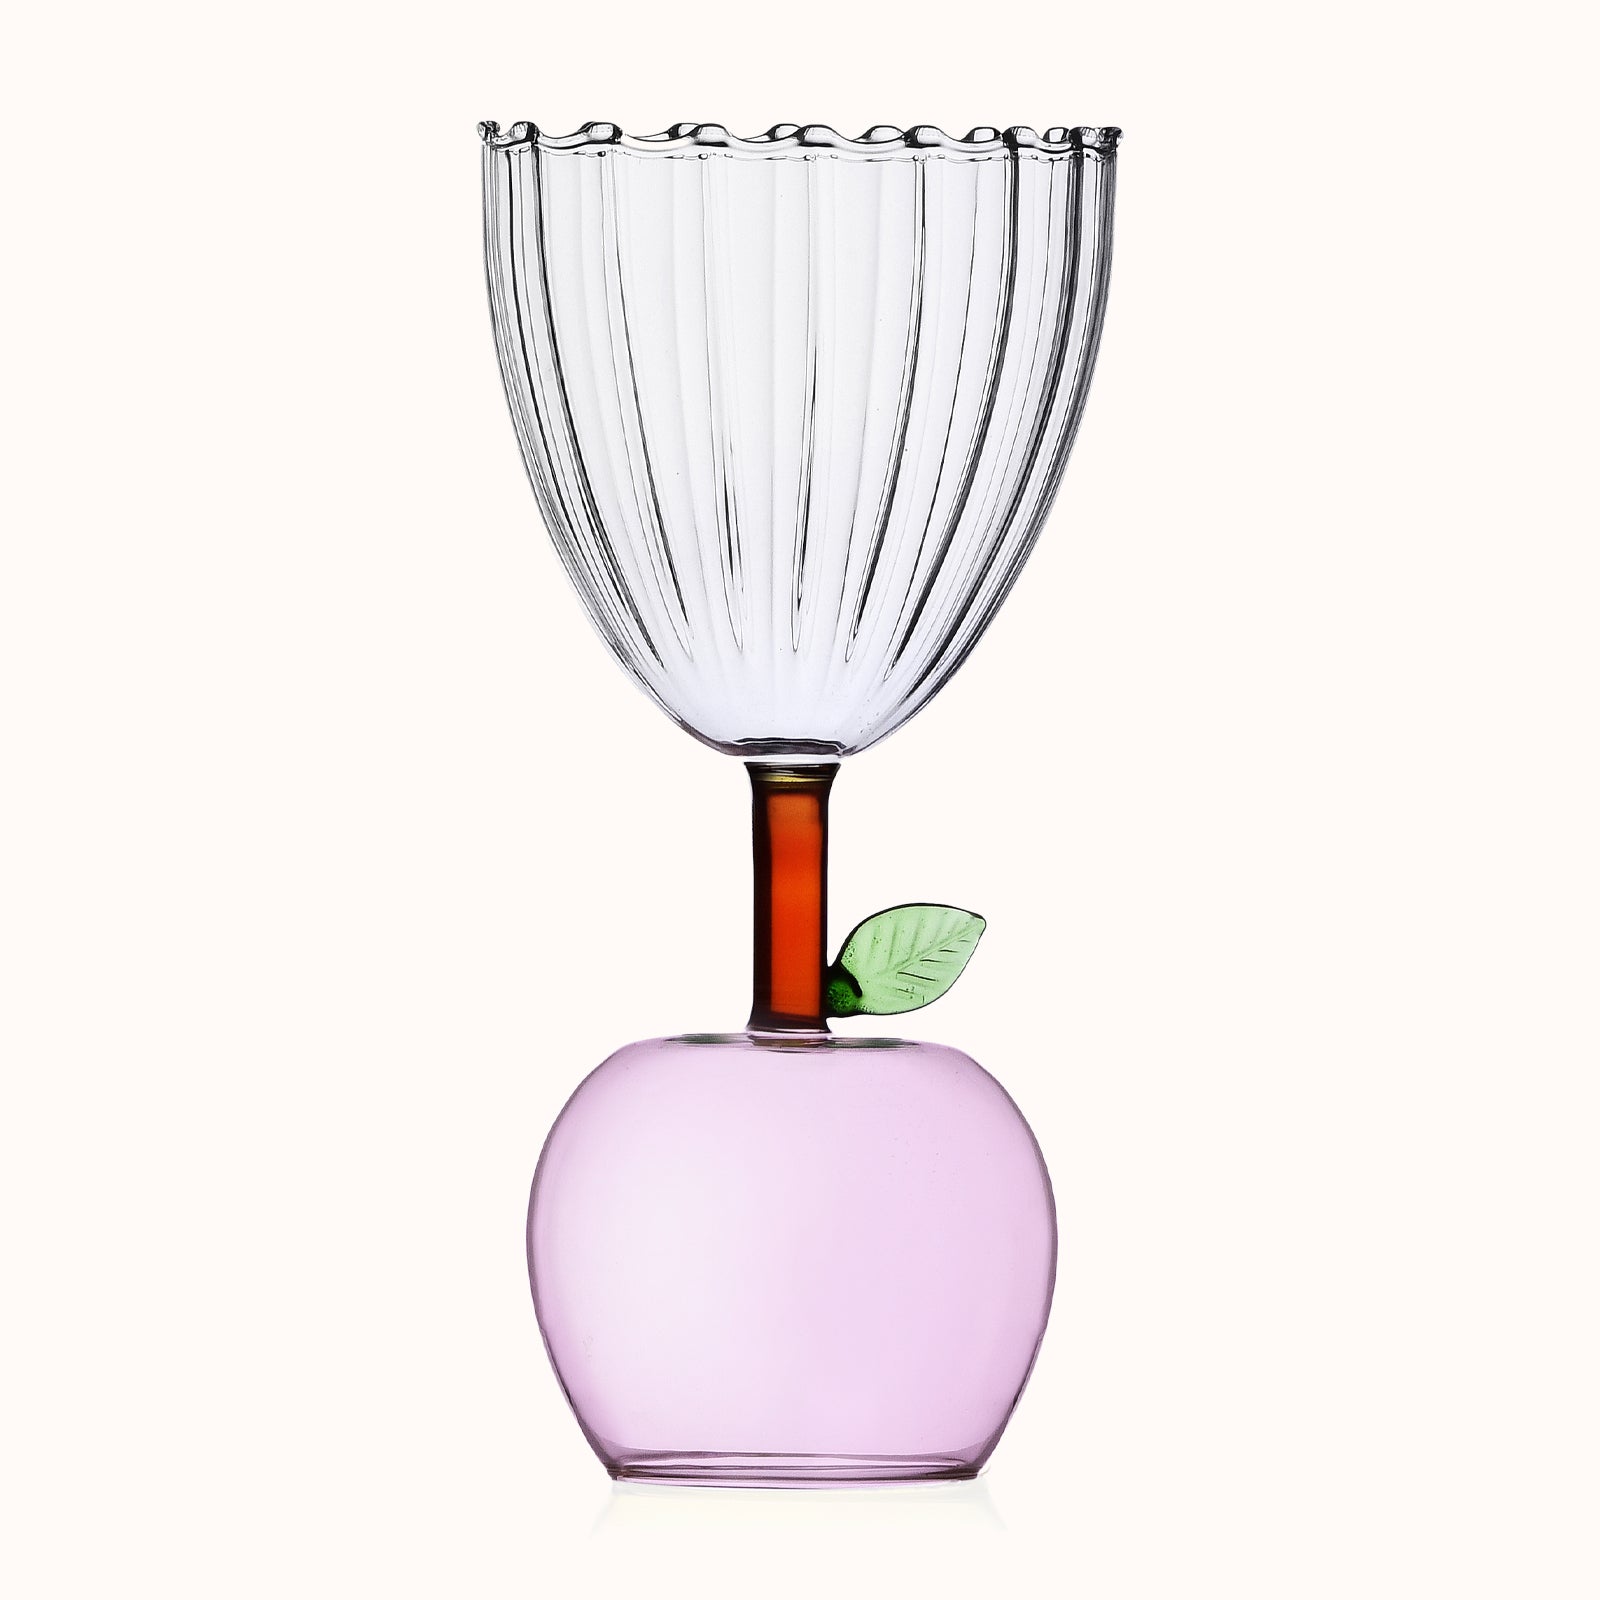 Pink Apple Shaped Wine Glass or Goblet